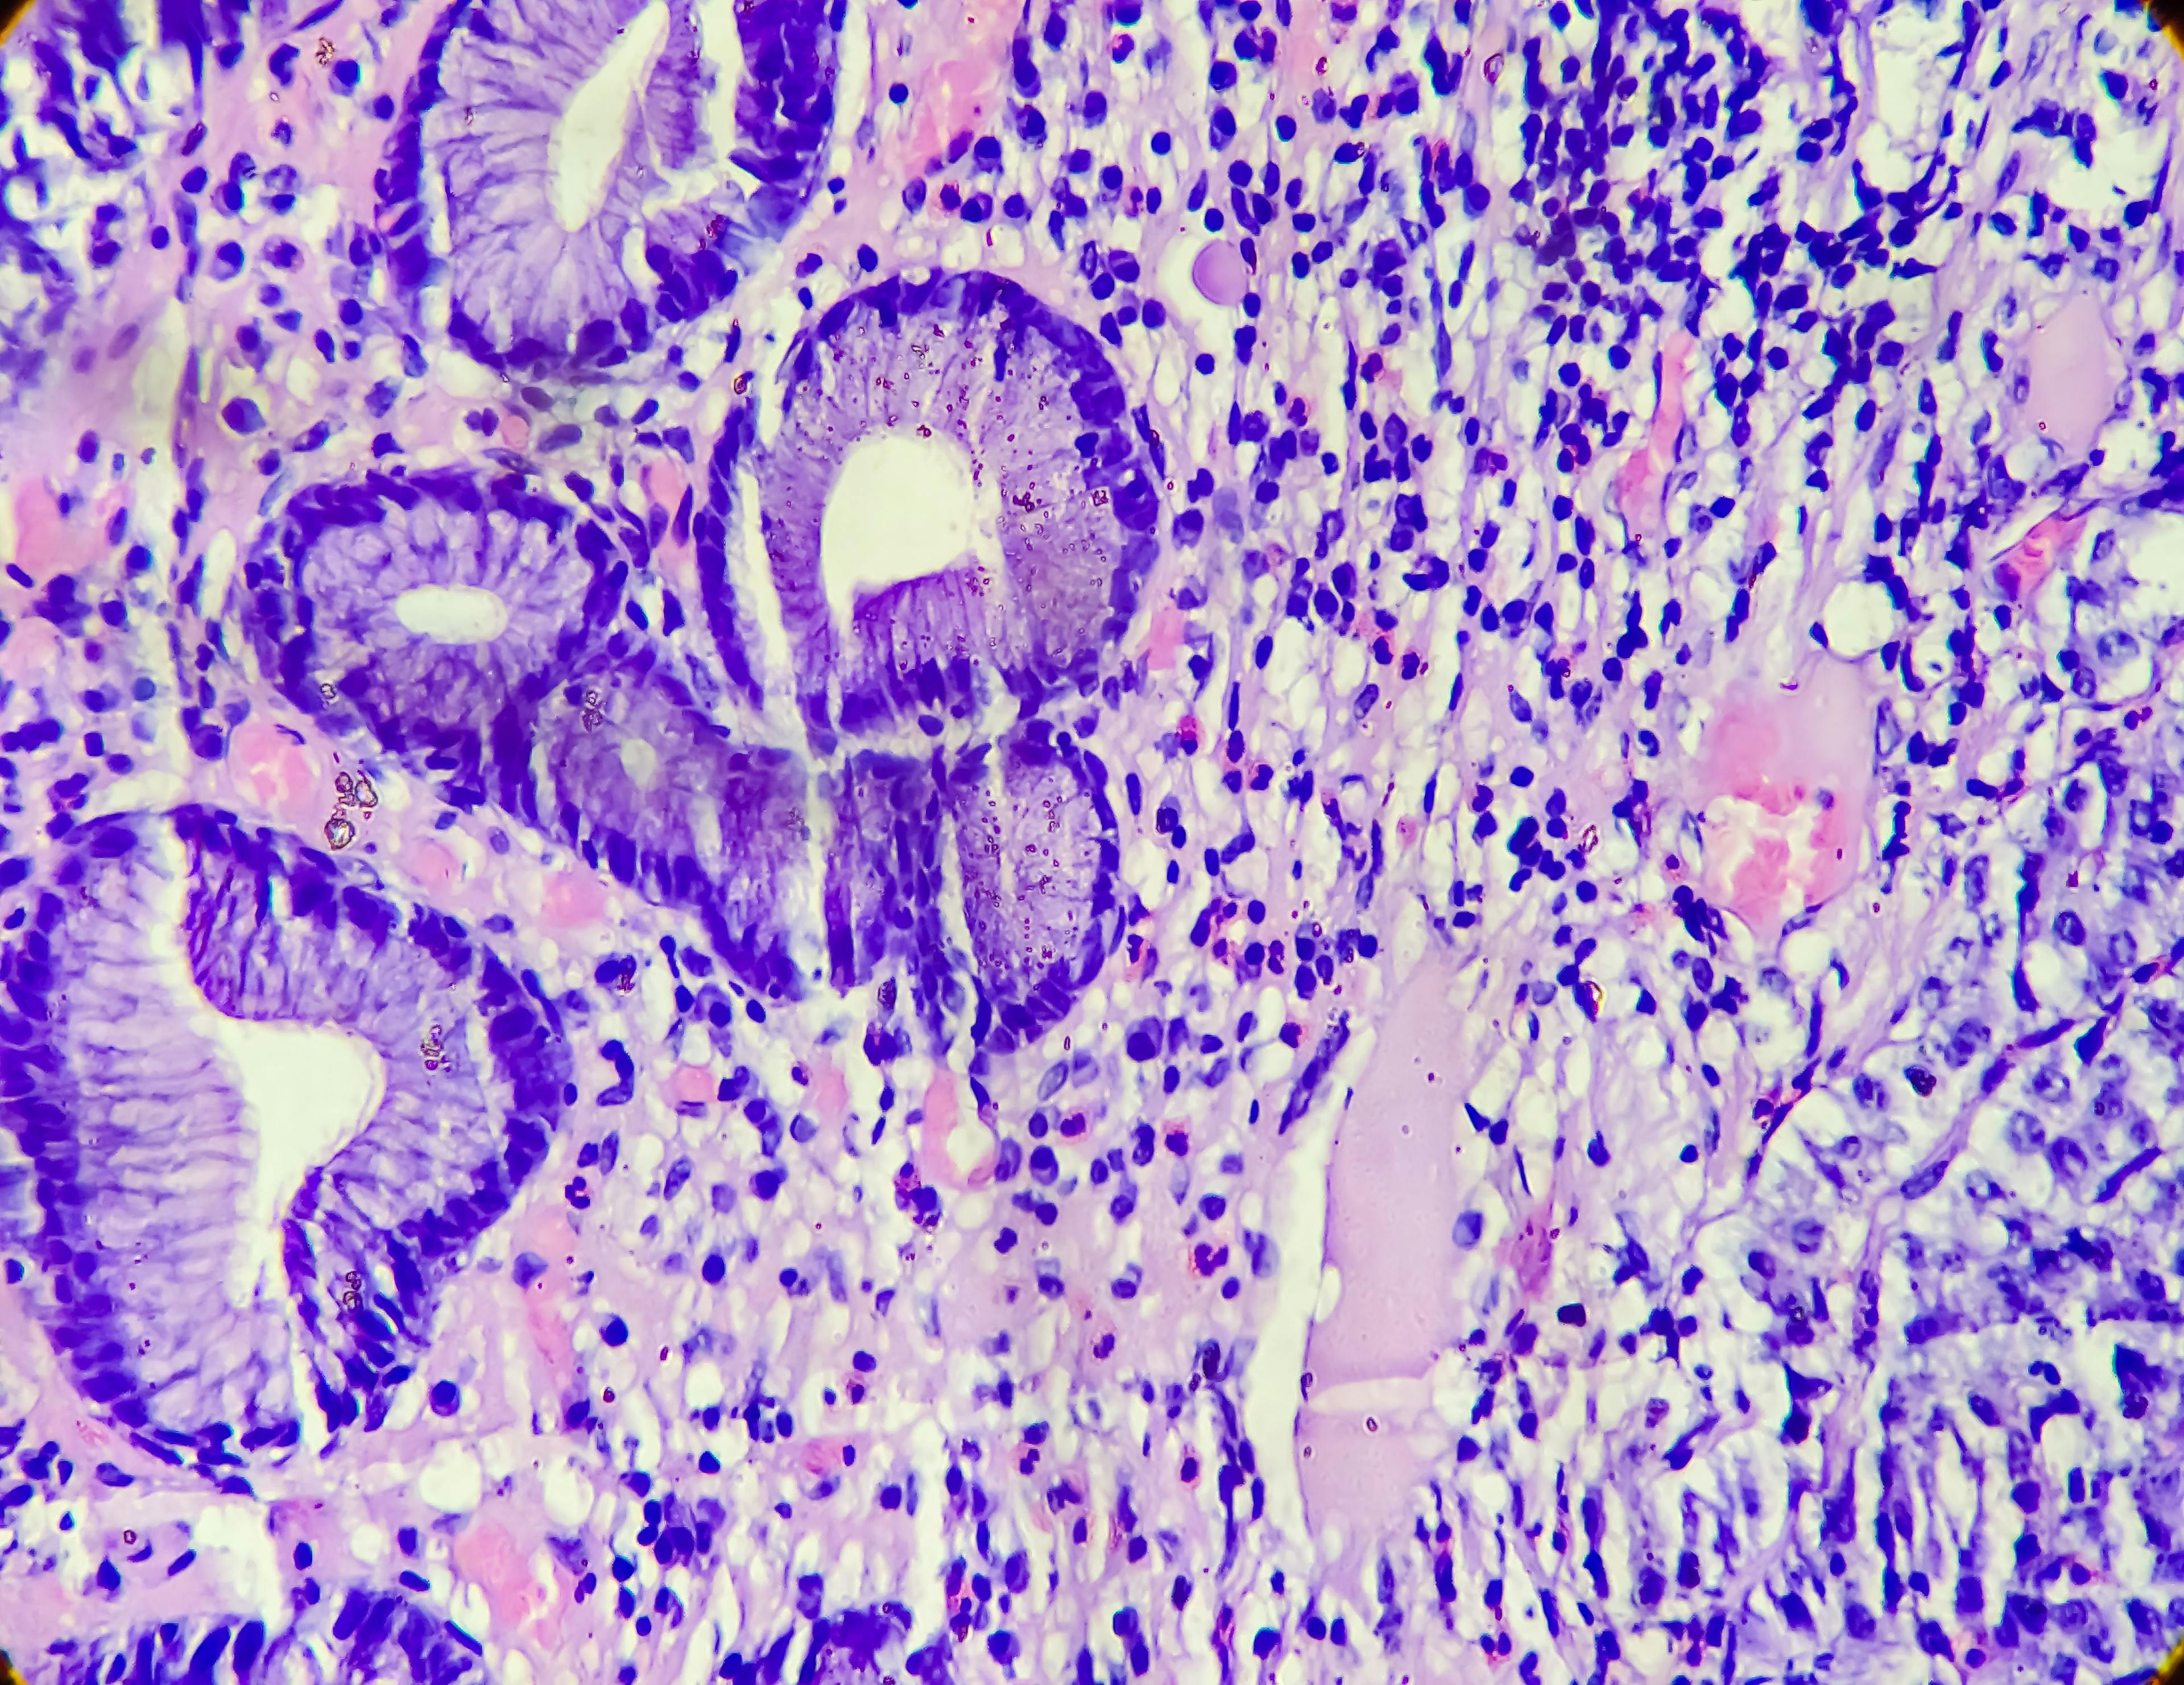 Photomicrograph of a carcinoid tumor, a type of neuroendocrine tumor (NET), which presented as a gastric polyp, 100x view | Image Credit: © MdBabul - www.stock.adobe.com